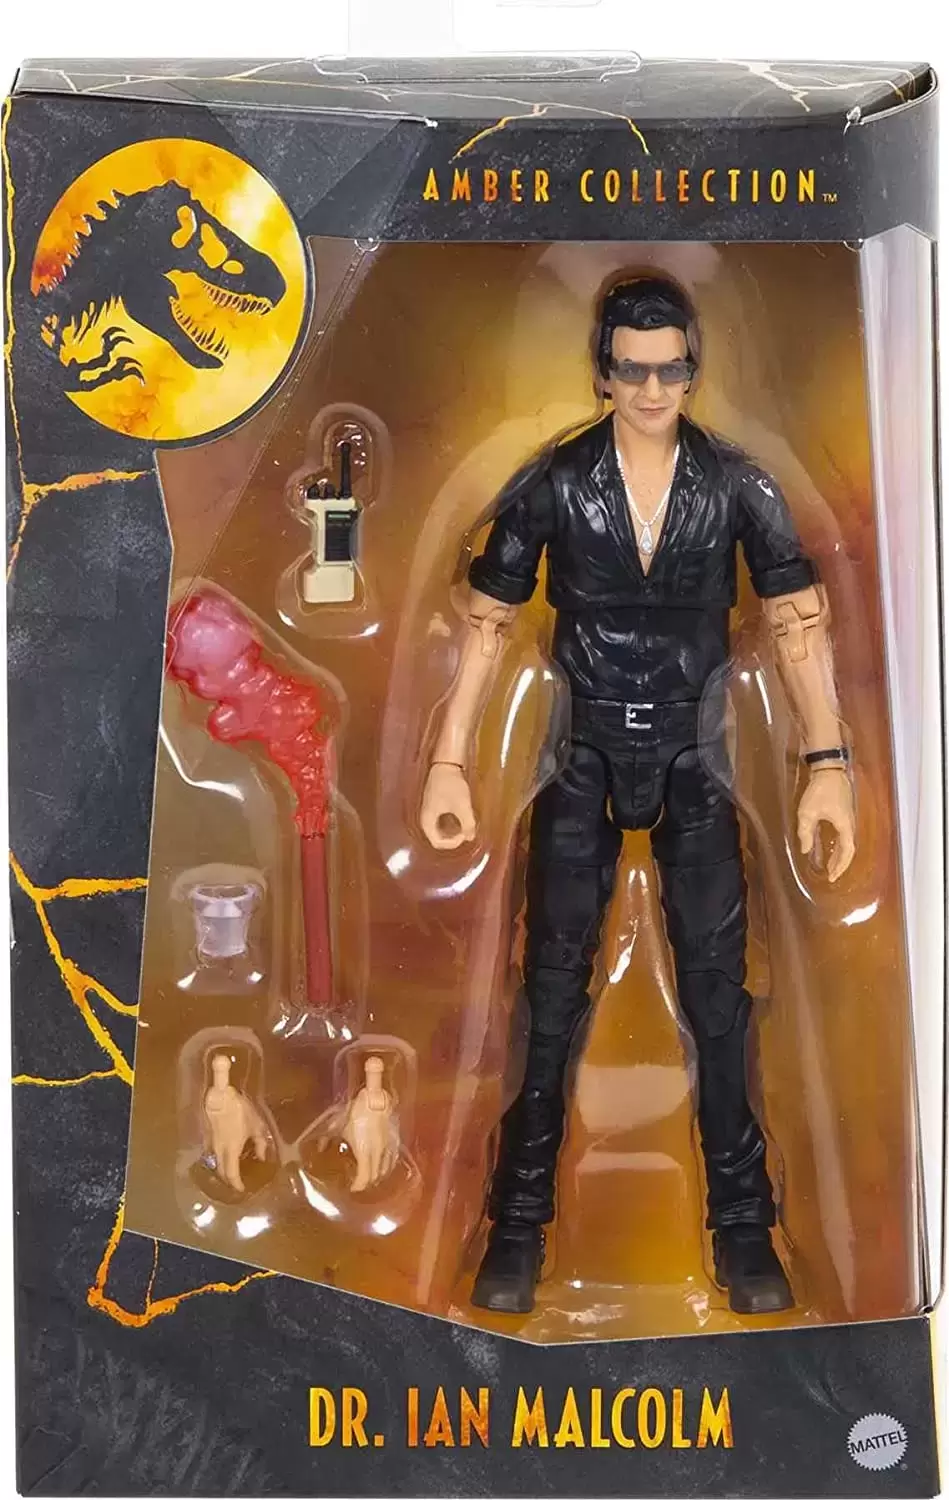 Jurassic World Amber Collection - Dr. Ian Malcolm